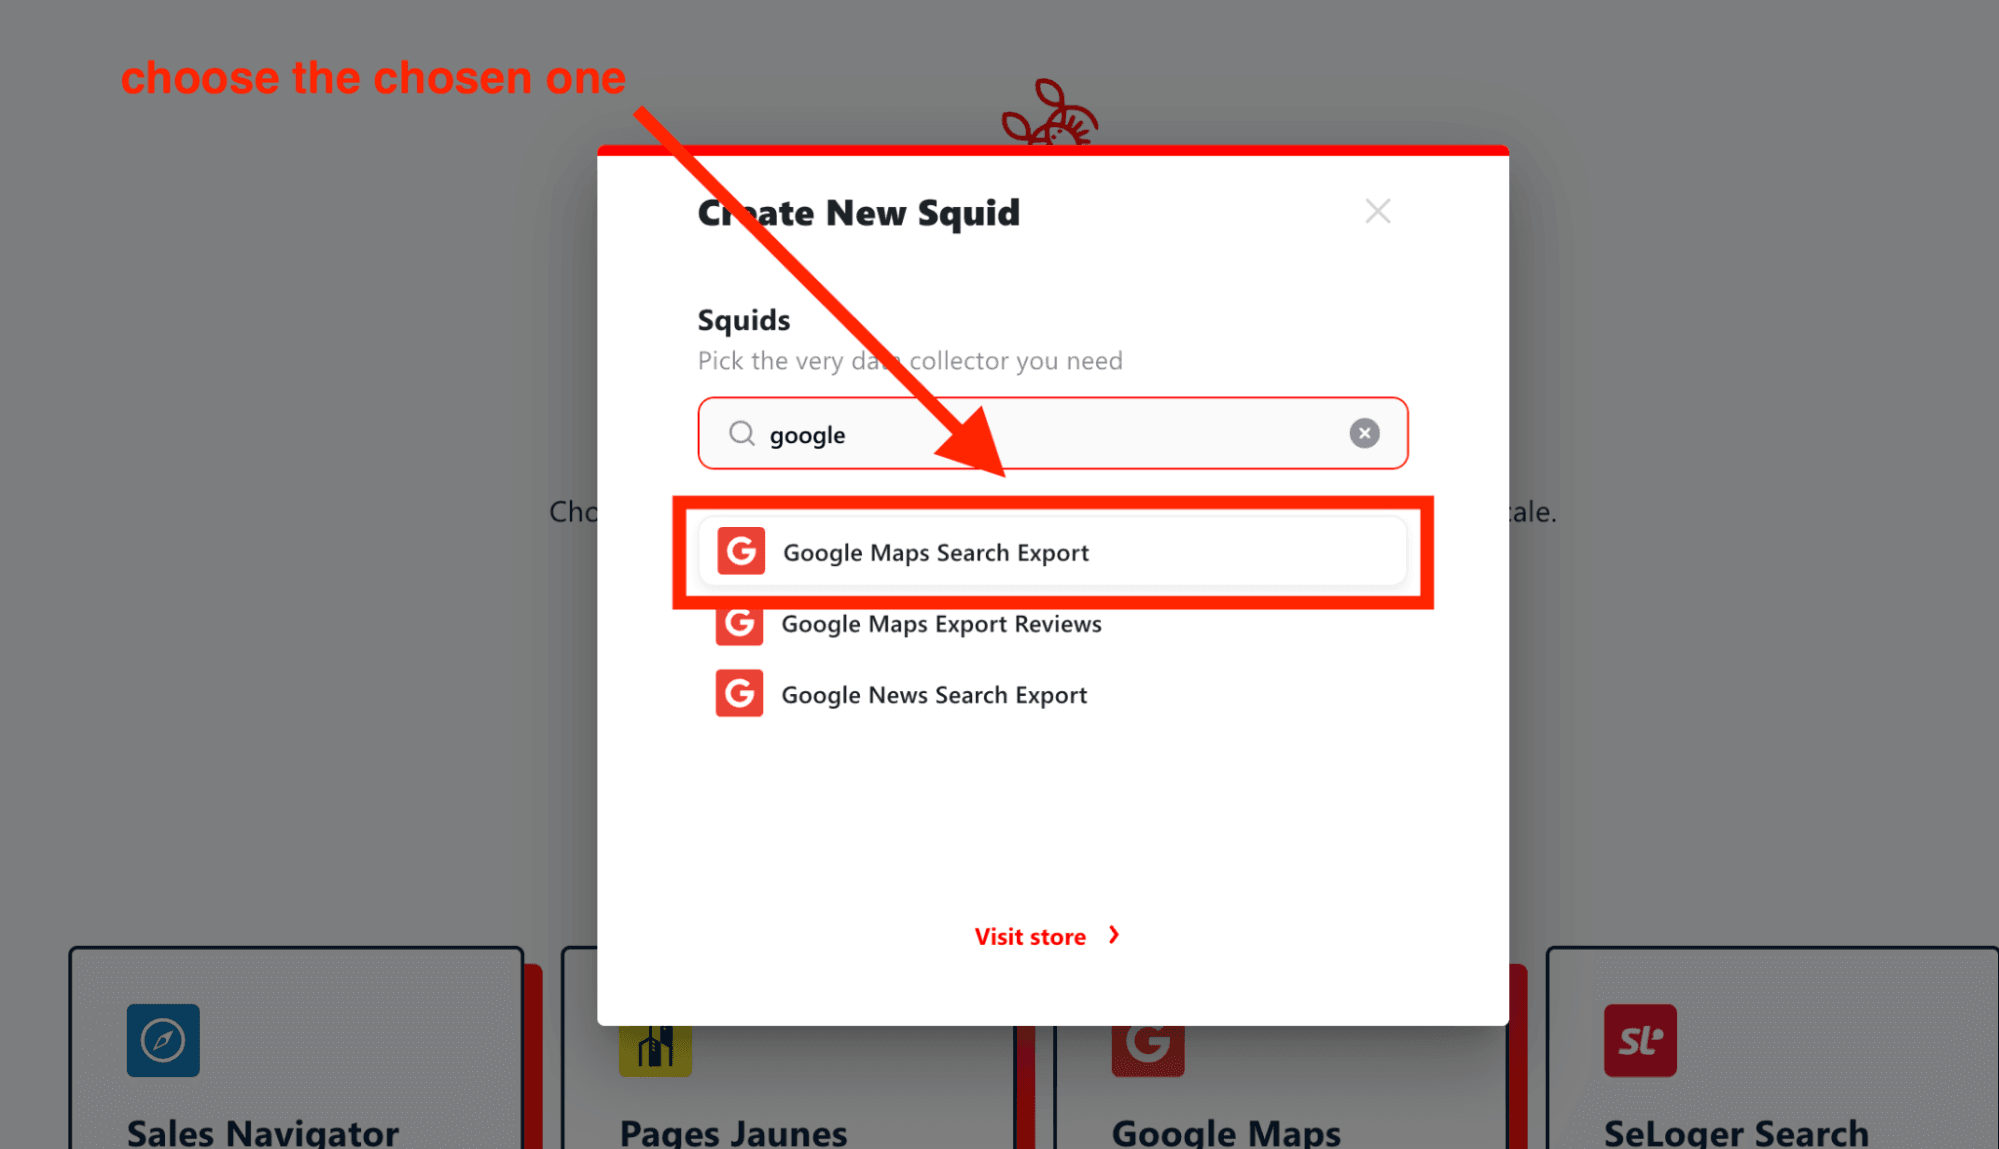 click on the google maps search export to create scraper - image1.png